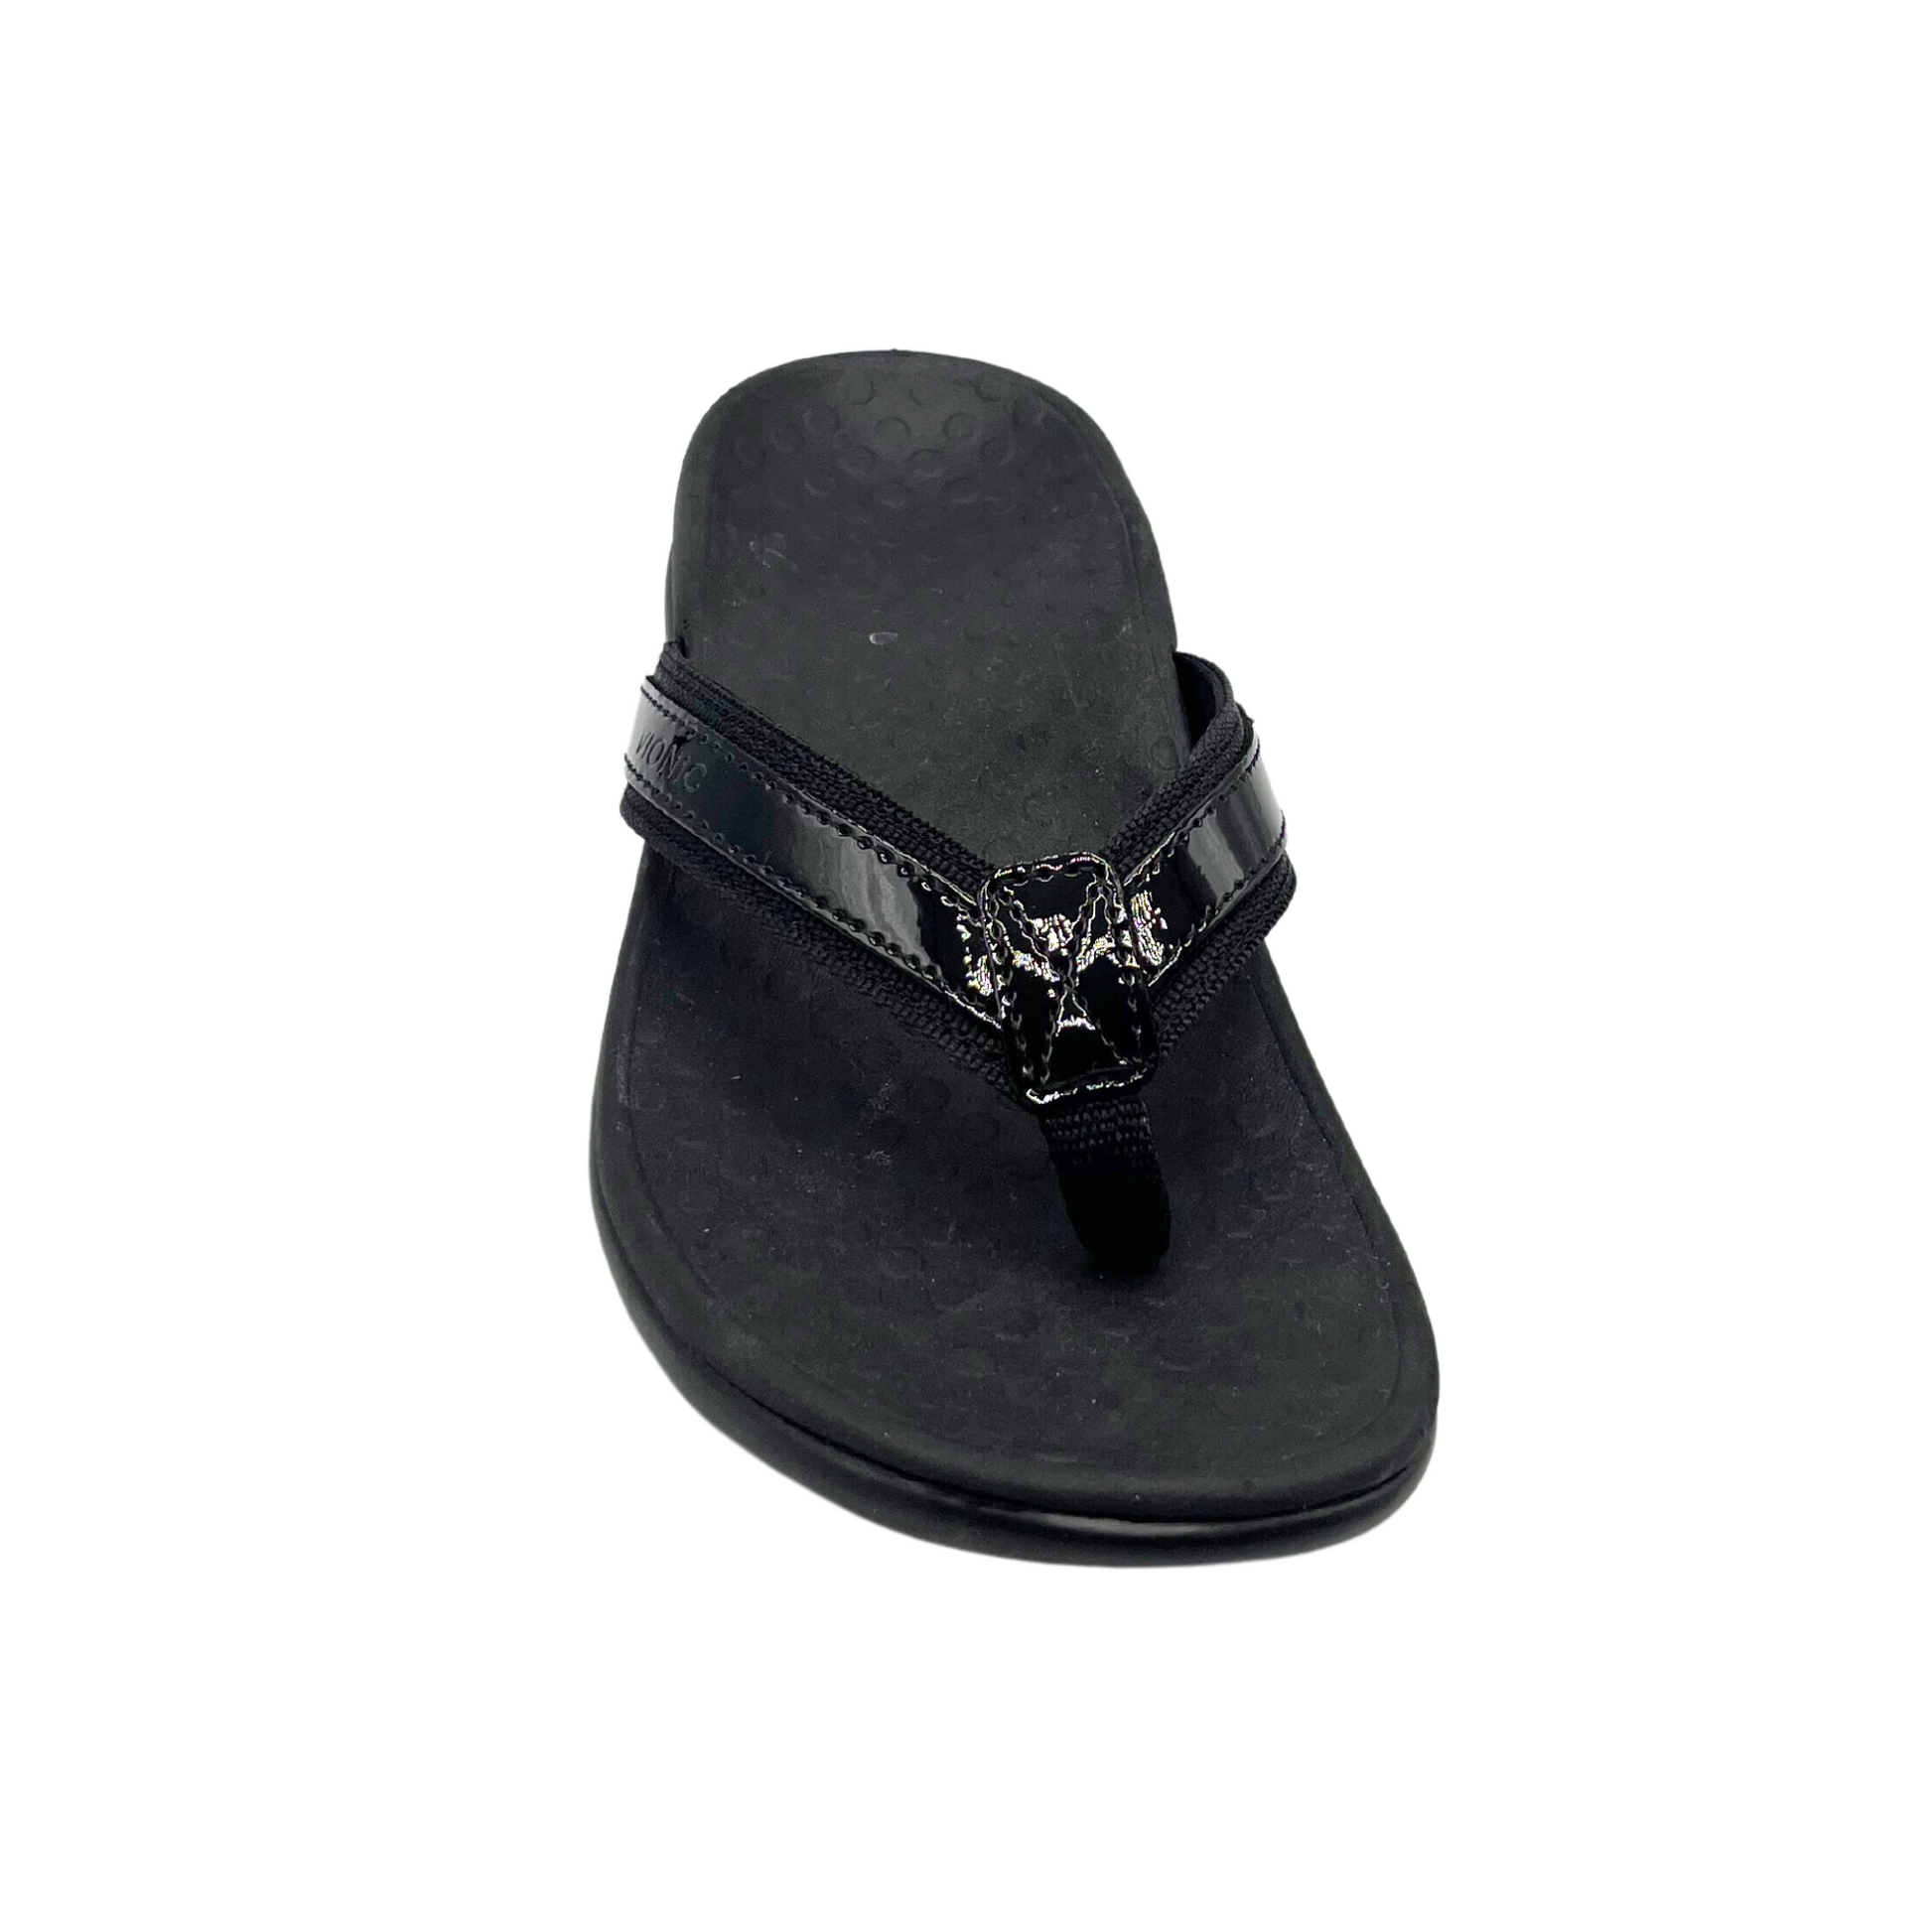 Top down view of a flip flop sandal in black.  Nice wide toe box and a contoured footbed